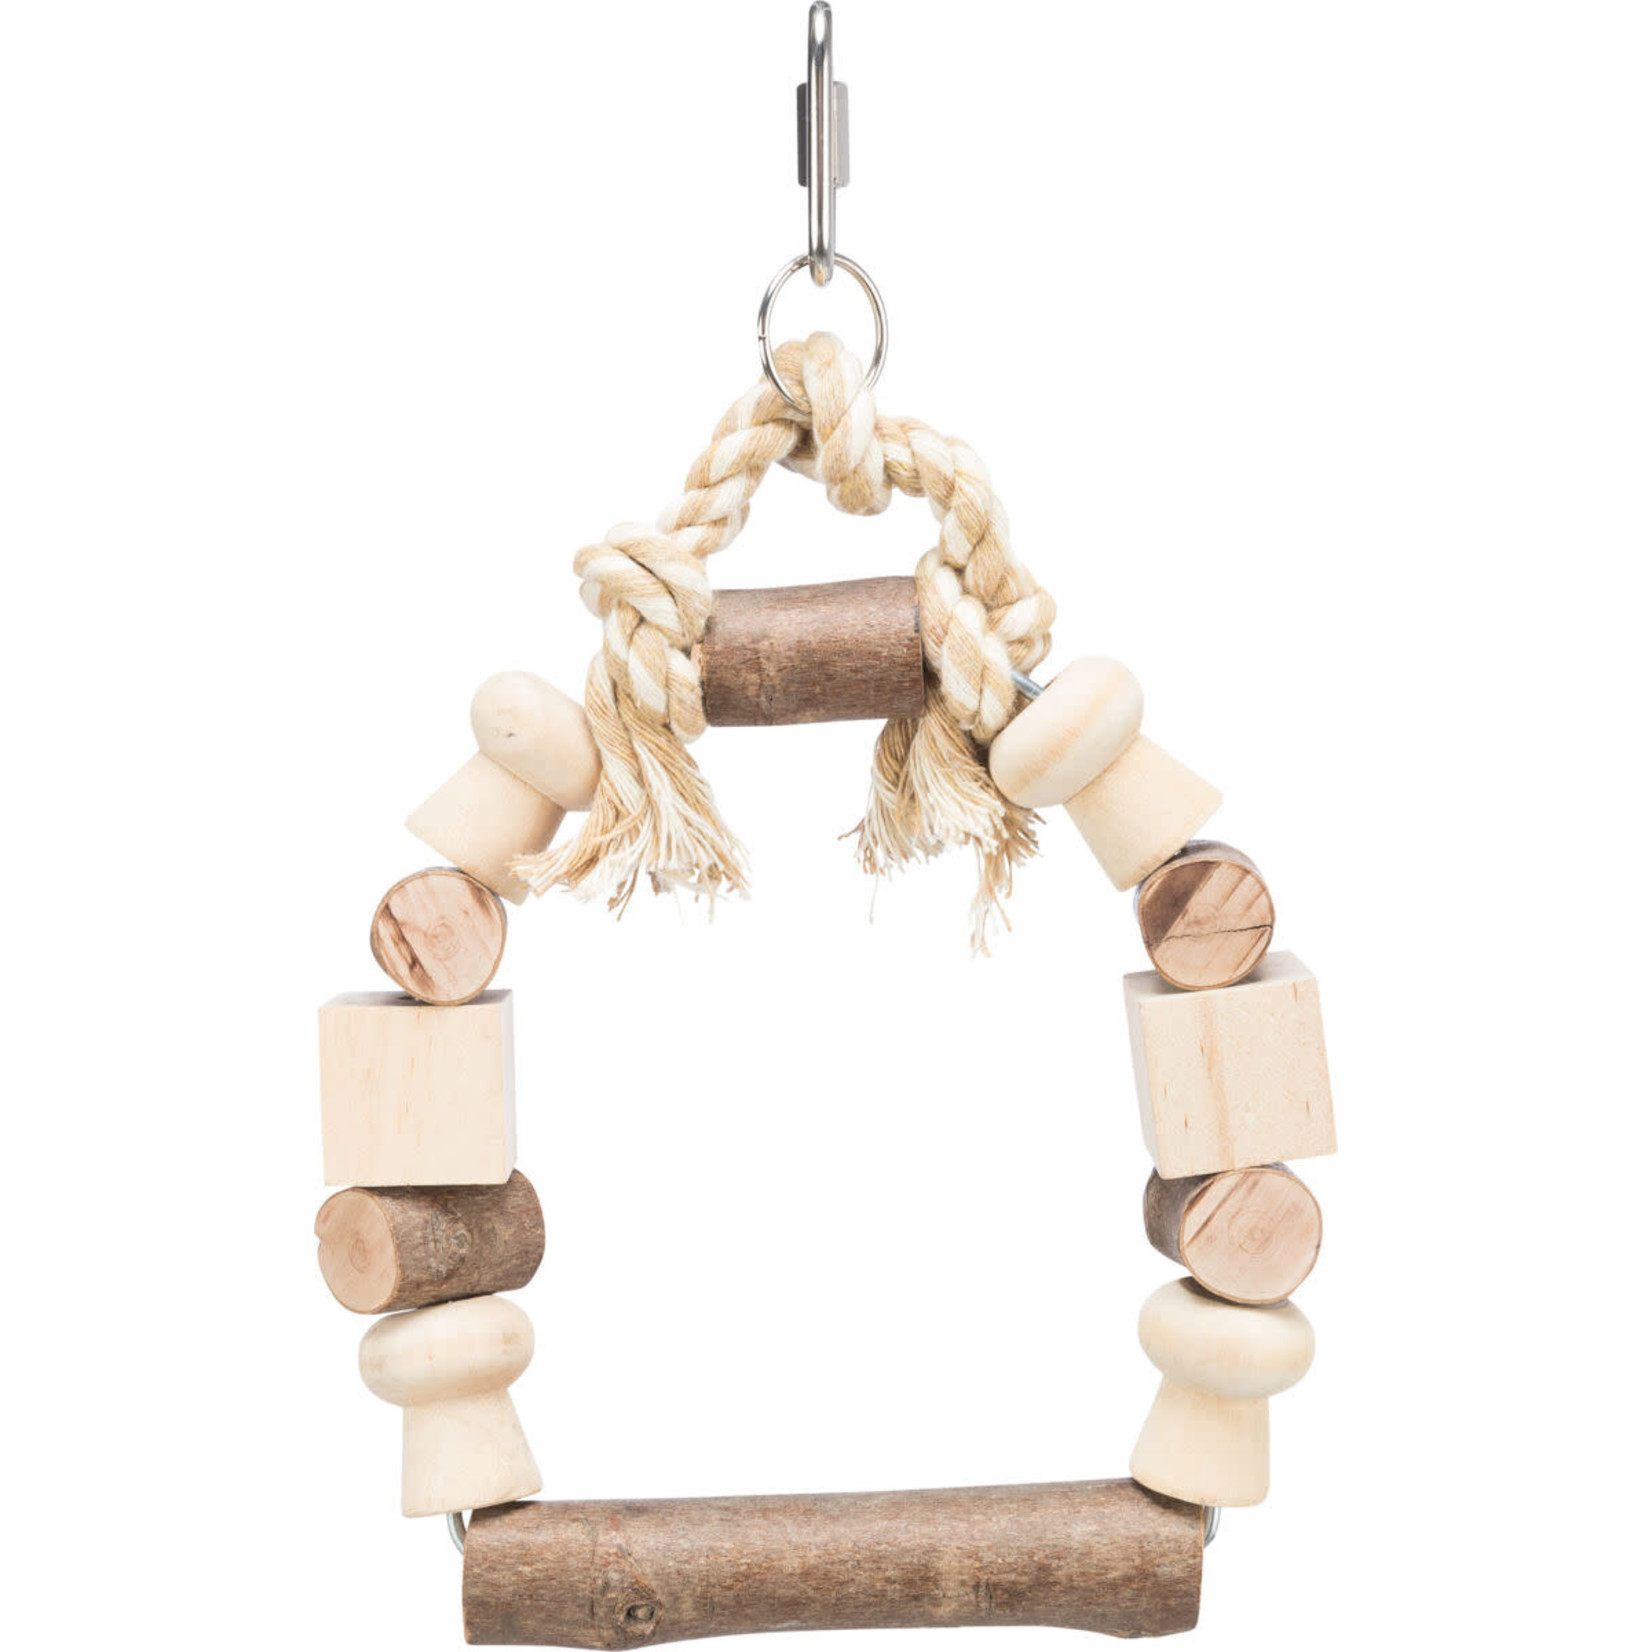 Trixie Arch Swing Wooden Cage Bird Toy, 13 x 19cm